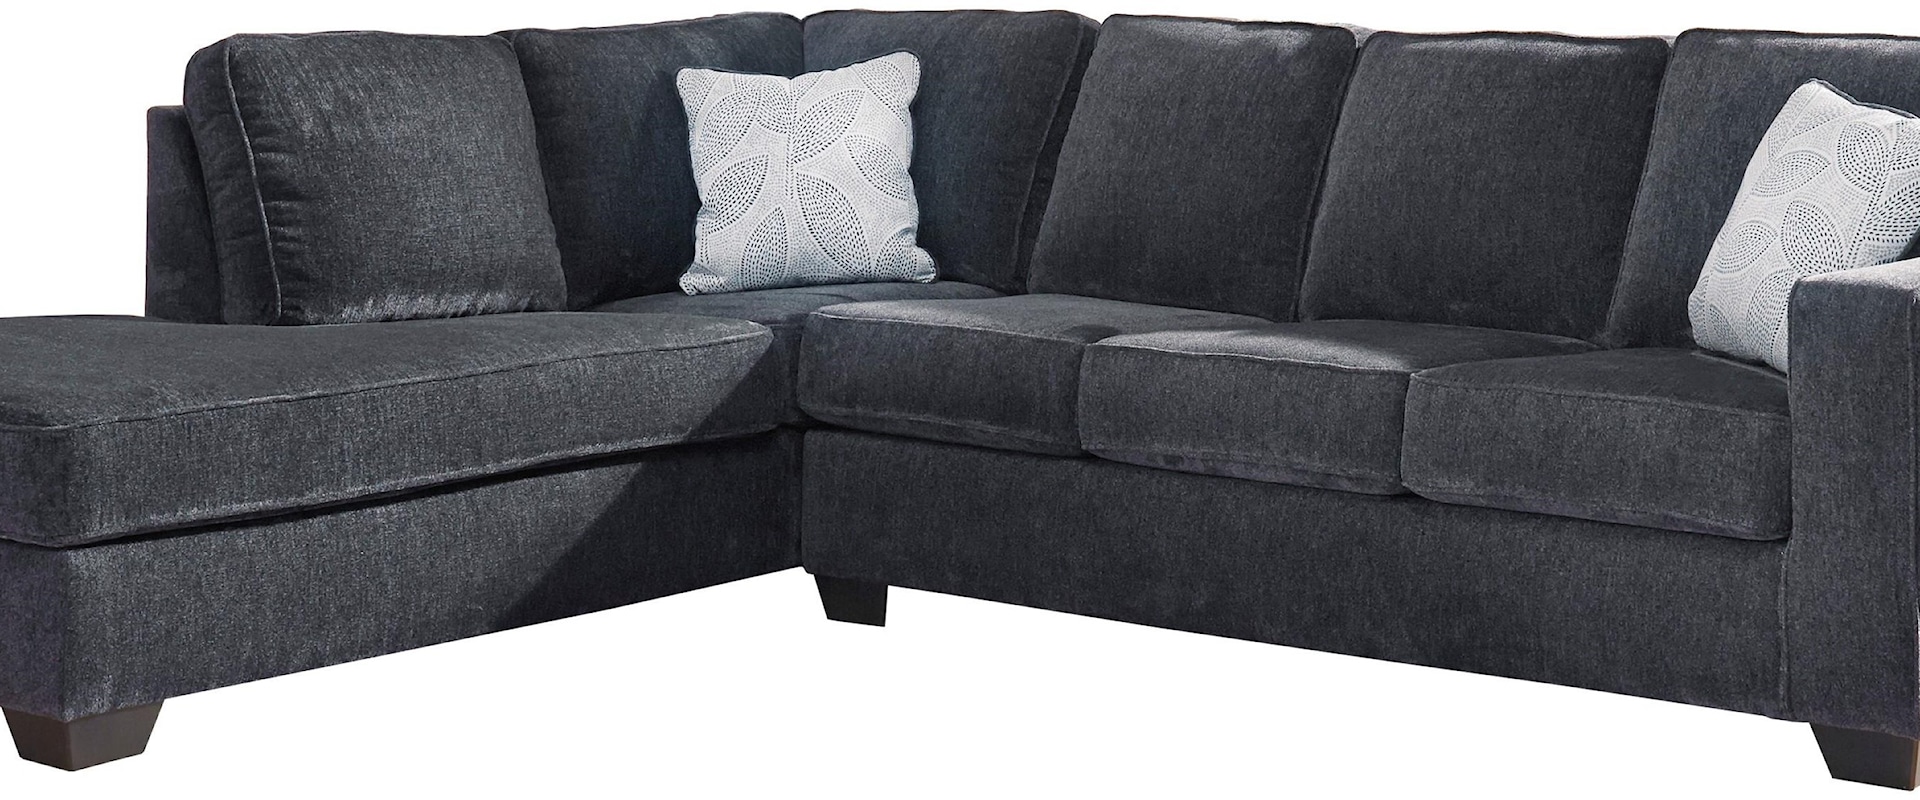 2 Piece Right Arm Facing Sofa, Left Arm Facing Chaise Sectional, Chair and Ottoman Set